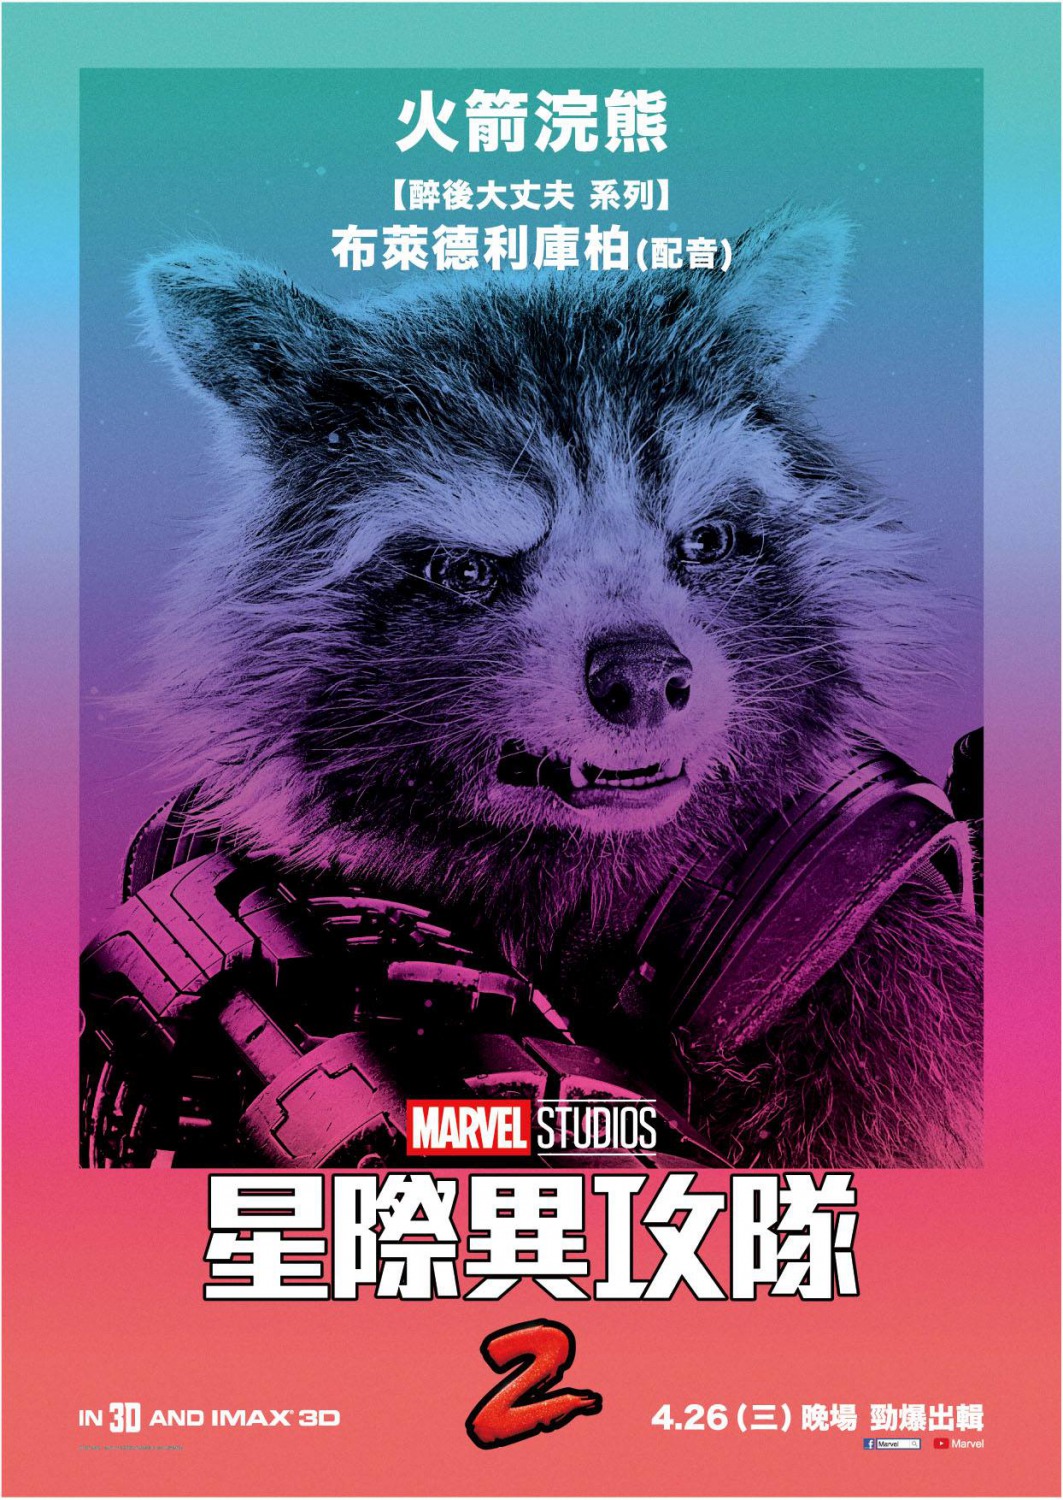 Extra Large Movie Poster Image for Guardians of the Galaxy Vol. 2 (#22 of 45)